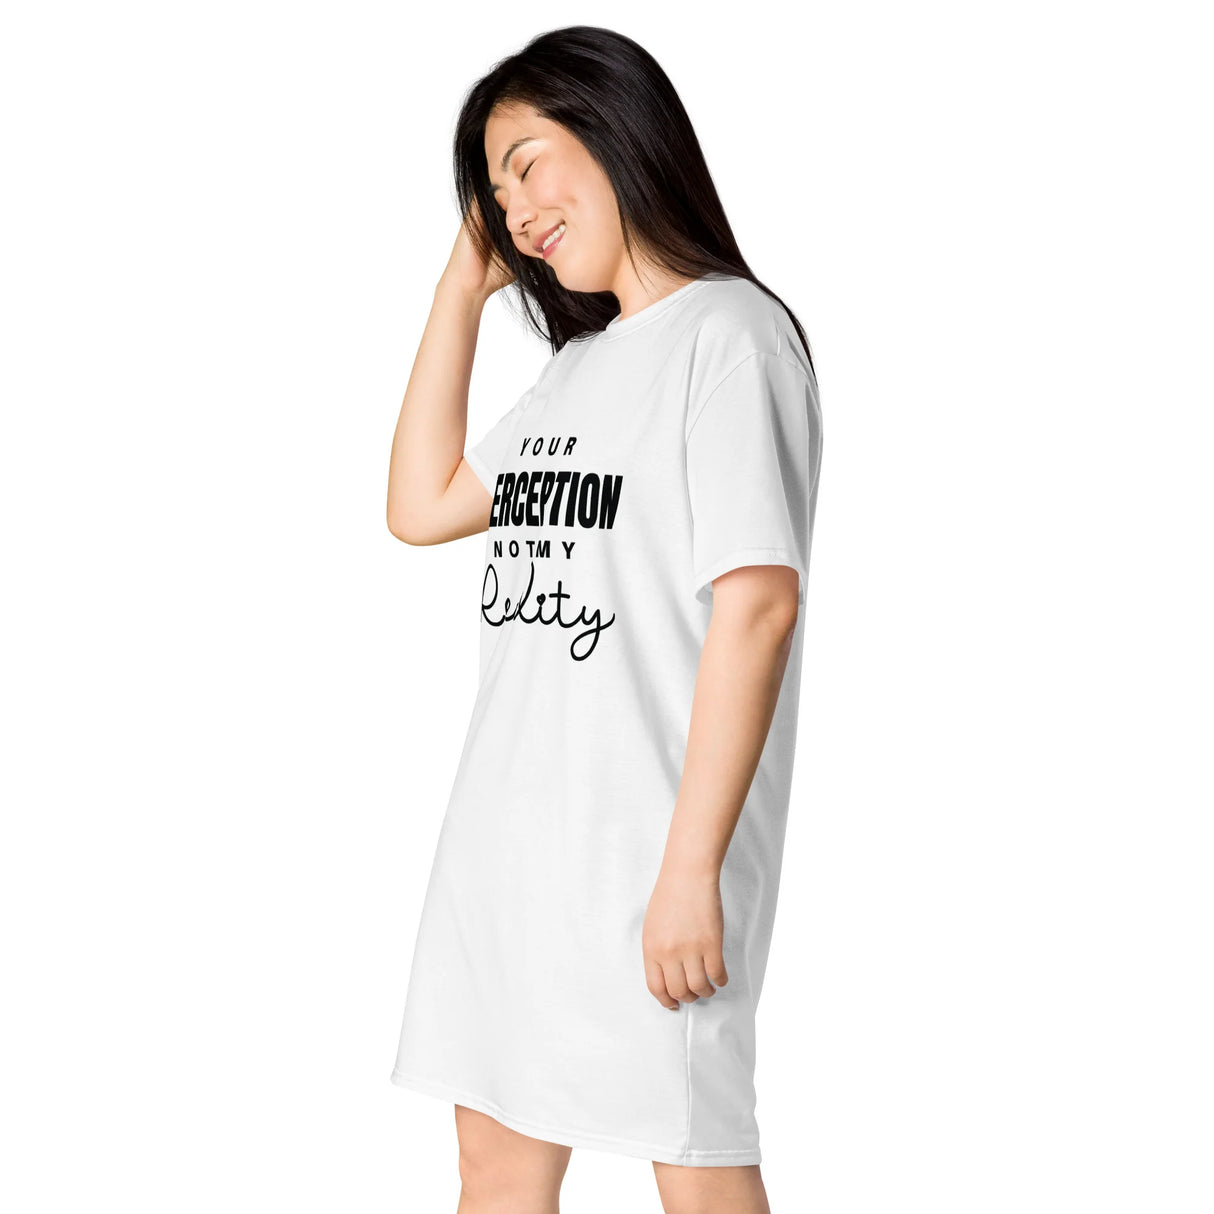 T-Shirt Dress, Your Perception Not My Reality